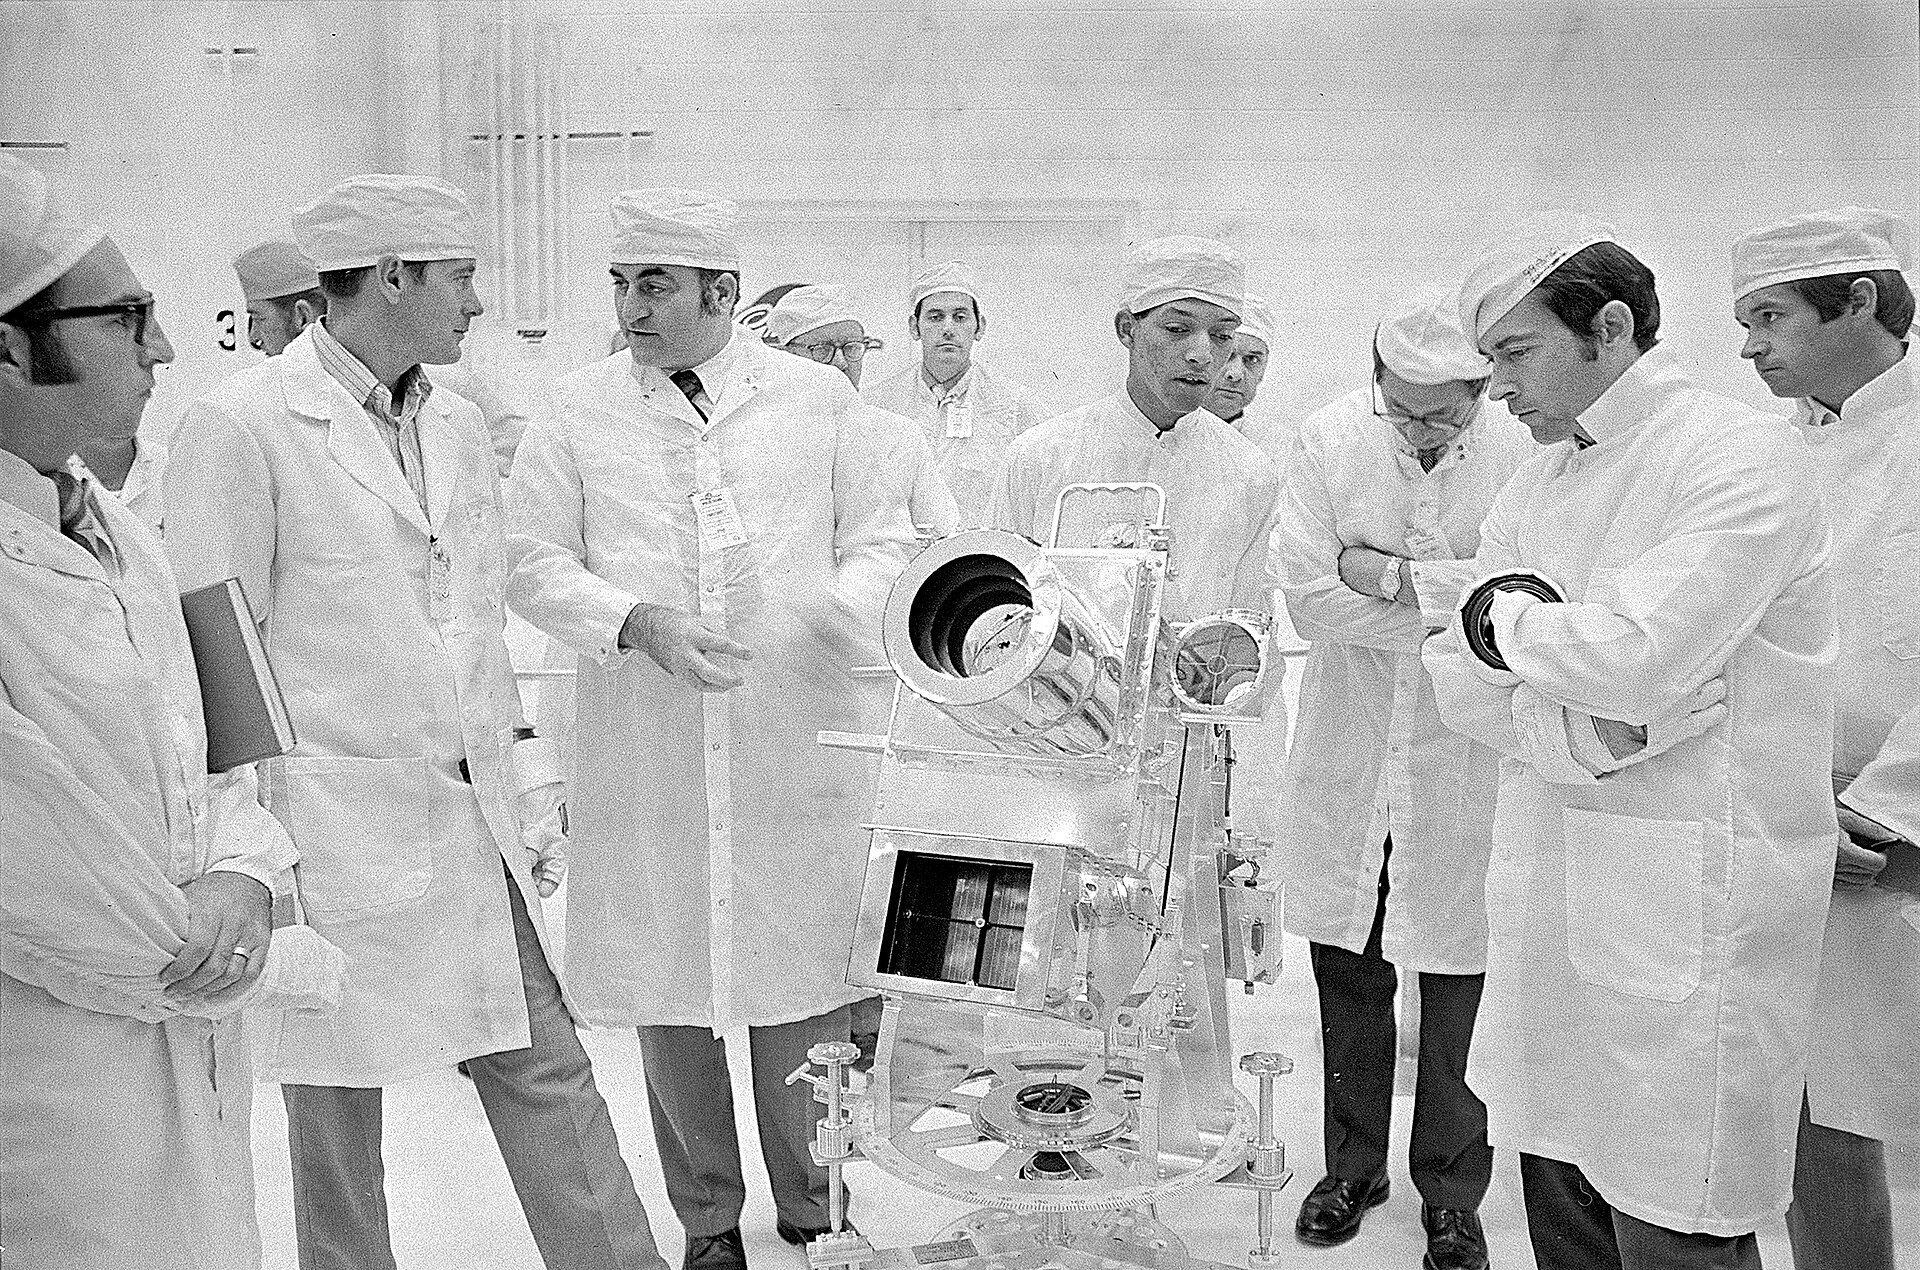 A black-and-white photo shows a group of at least 11 men wearing white lab coats and white caps; a telescopic object sits in front. Carruthers, in the center, is speaking.